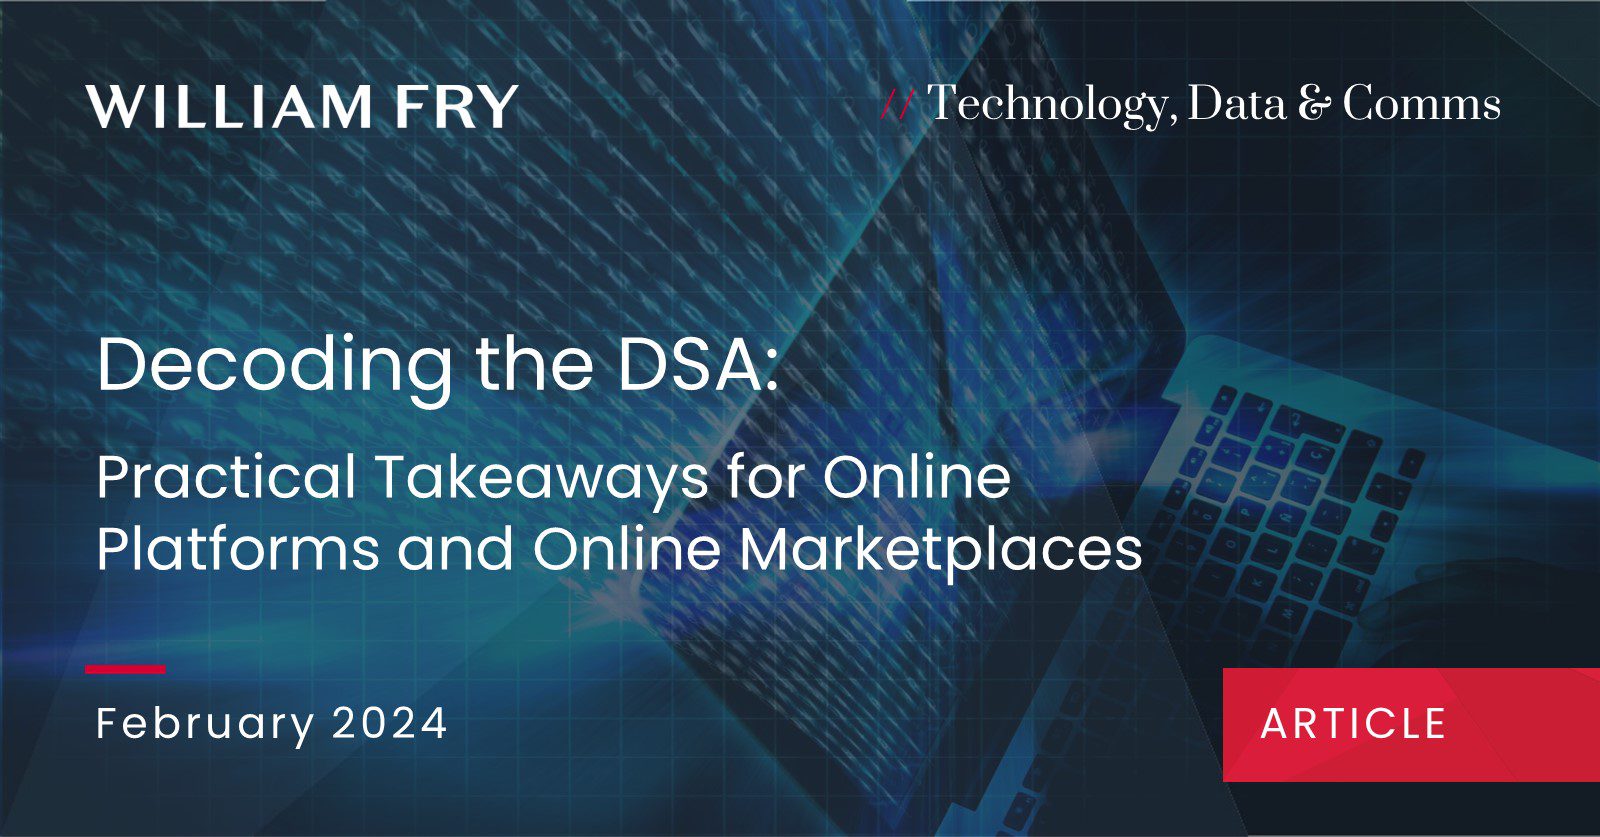 Decoding the DSA: Practical Takeaways for Online Platforms and Online Marketplaces